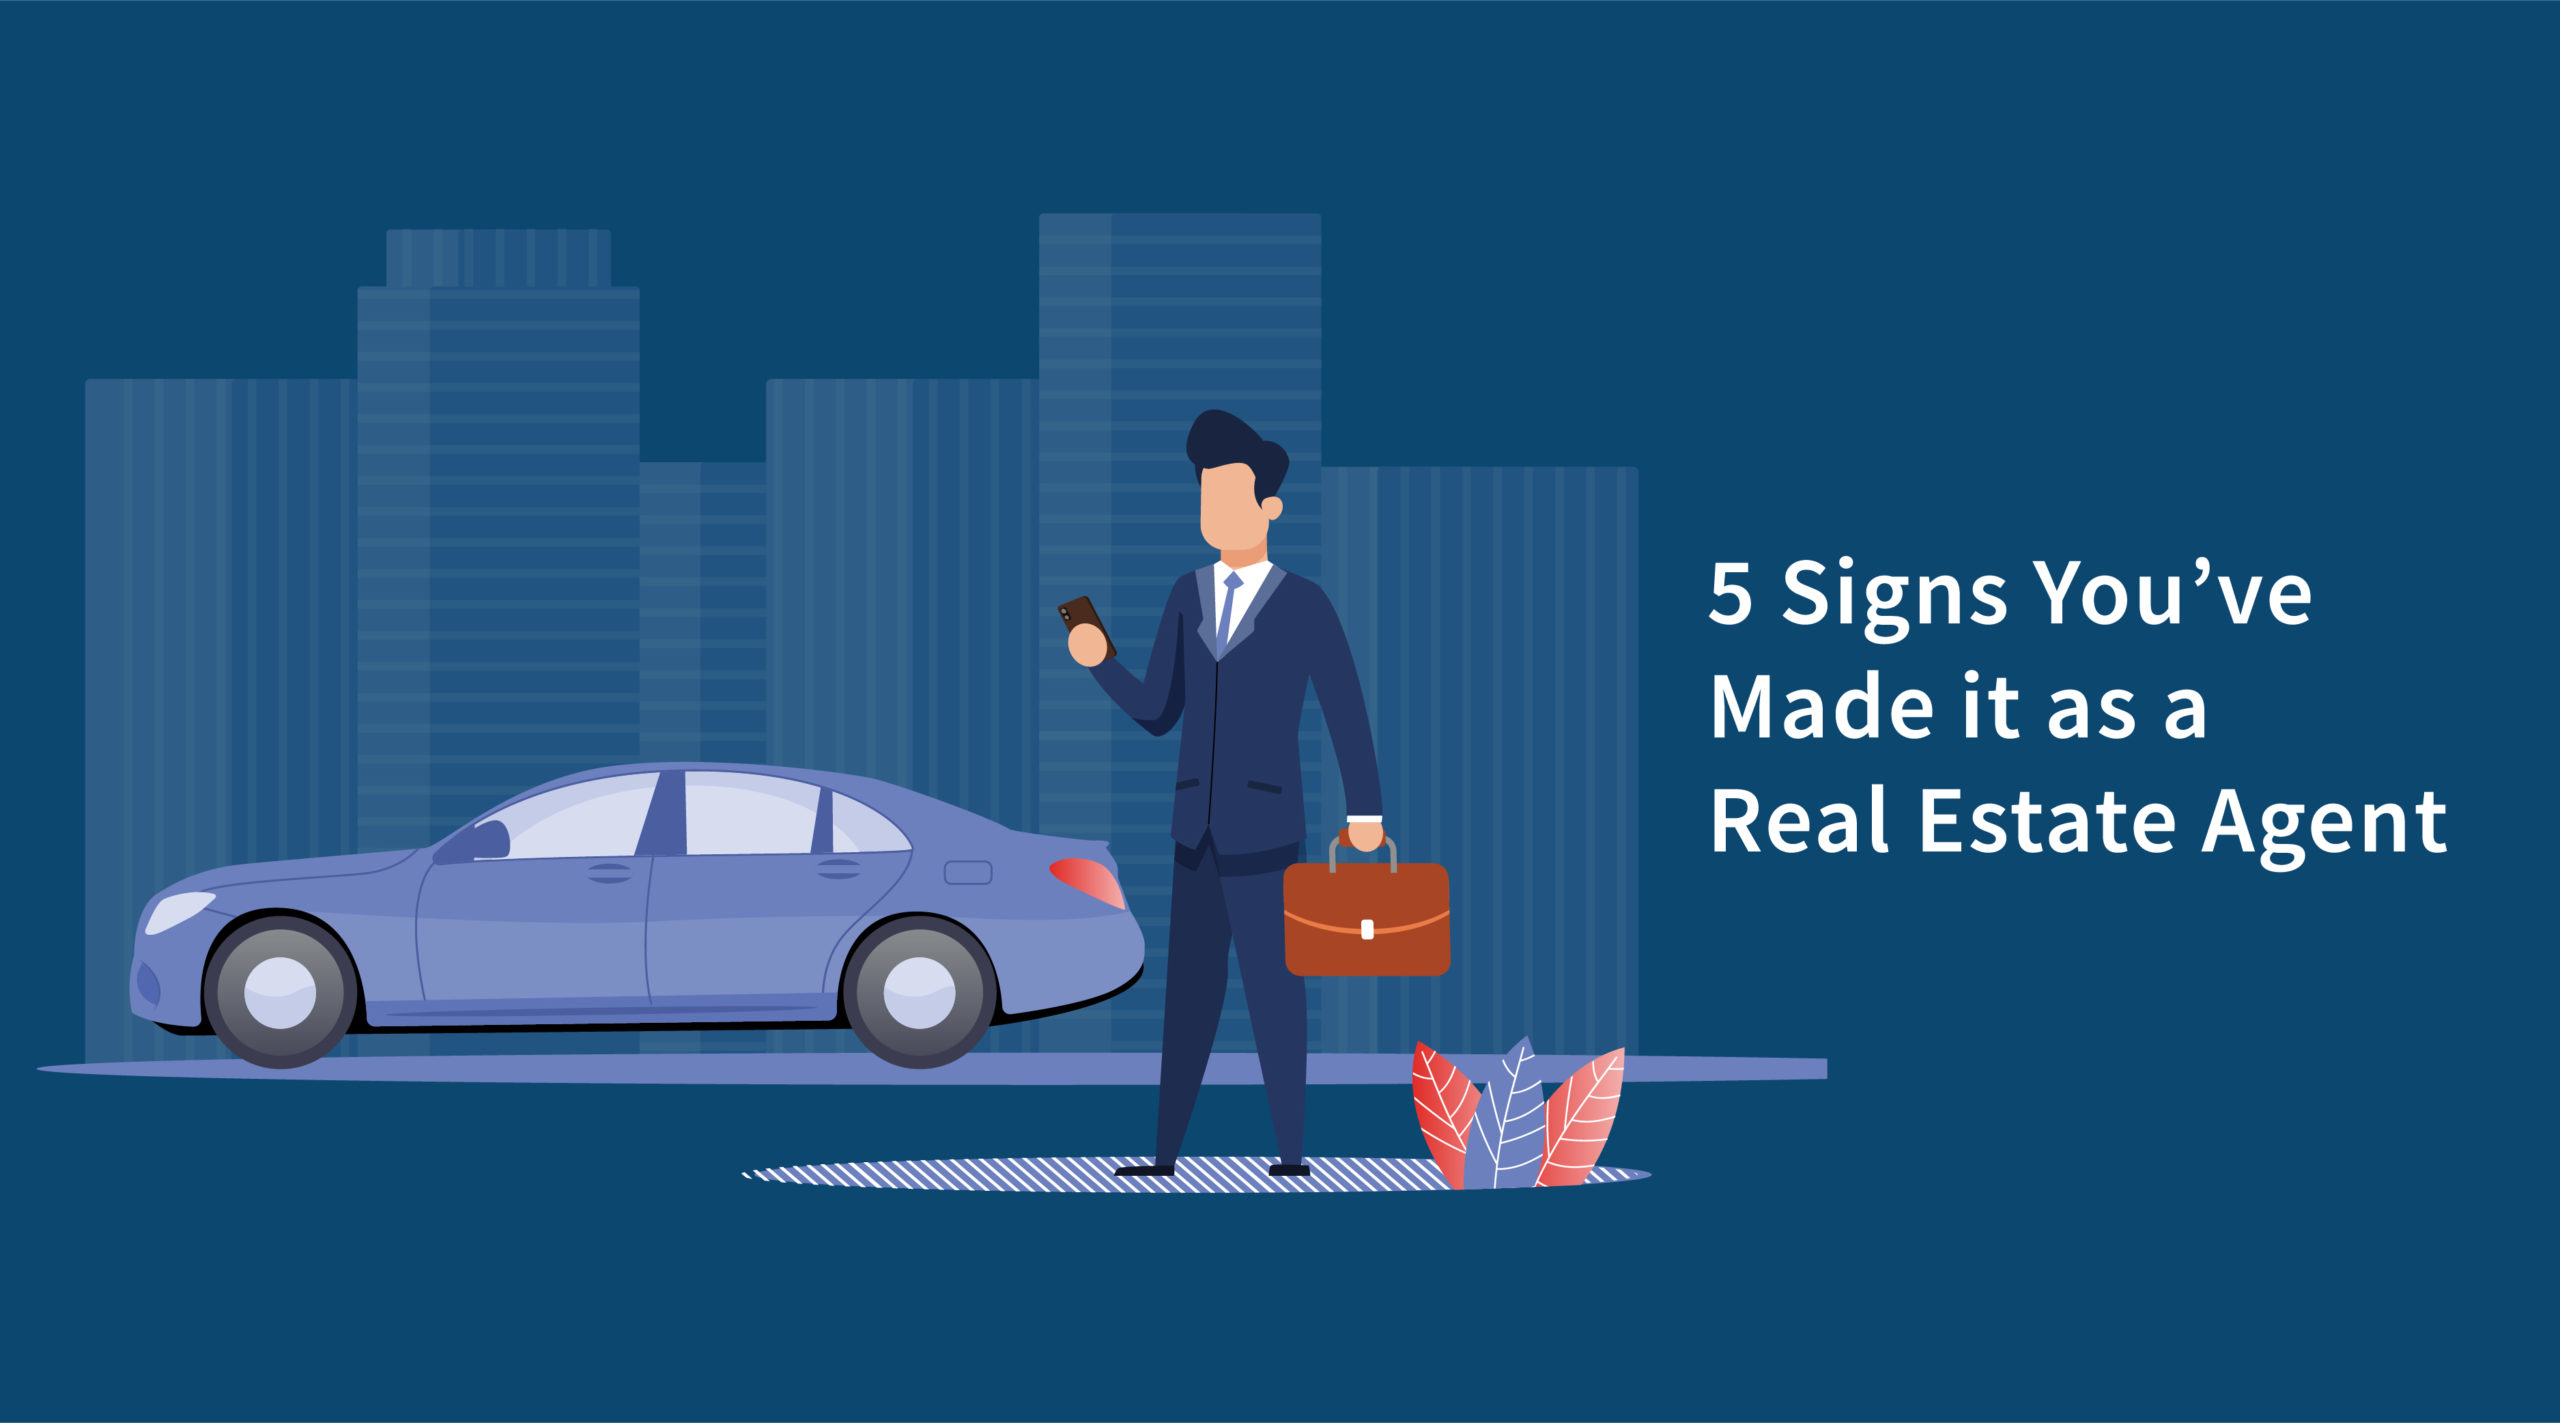 5 Signs You’ve Made it as a Real Estate Agent